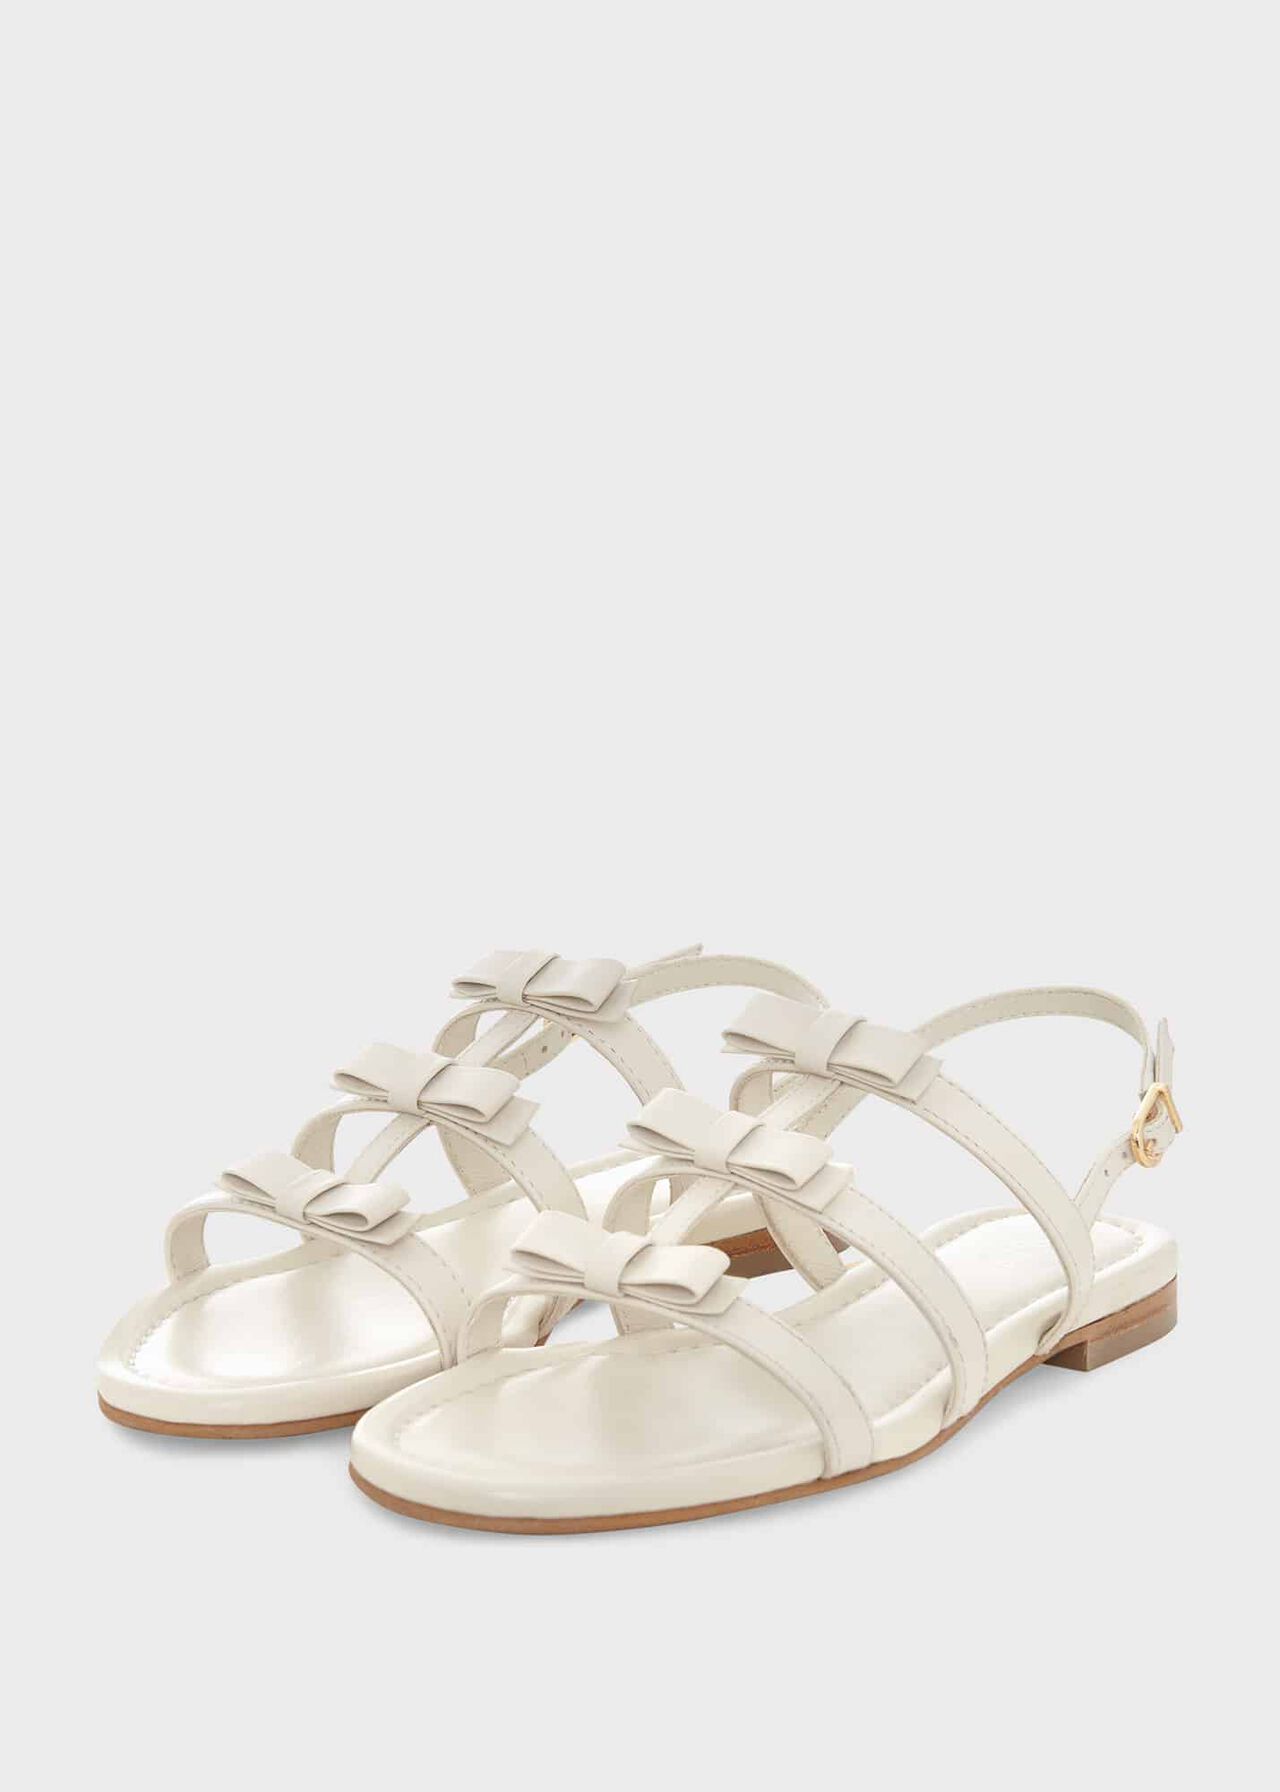 Holly Leather Bow Sandals, White, hi-res